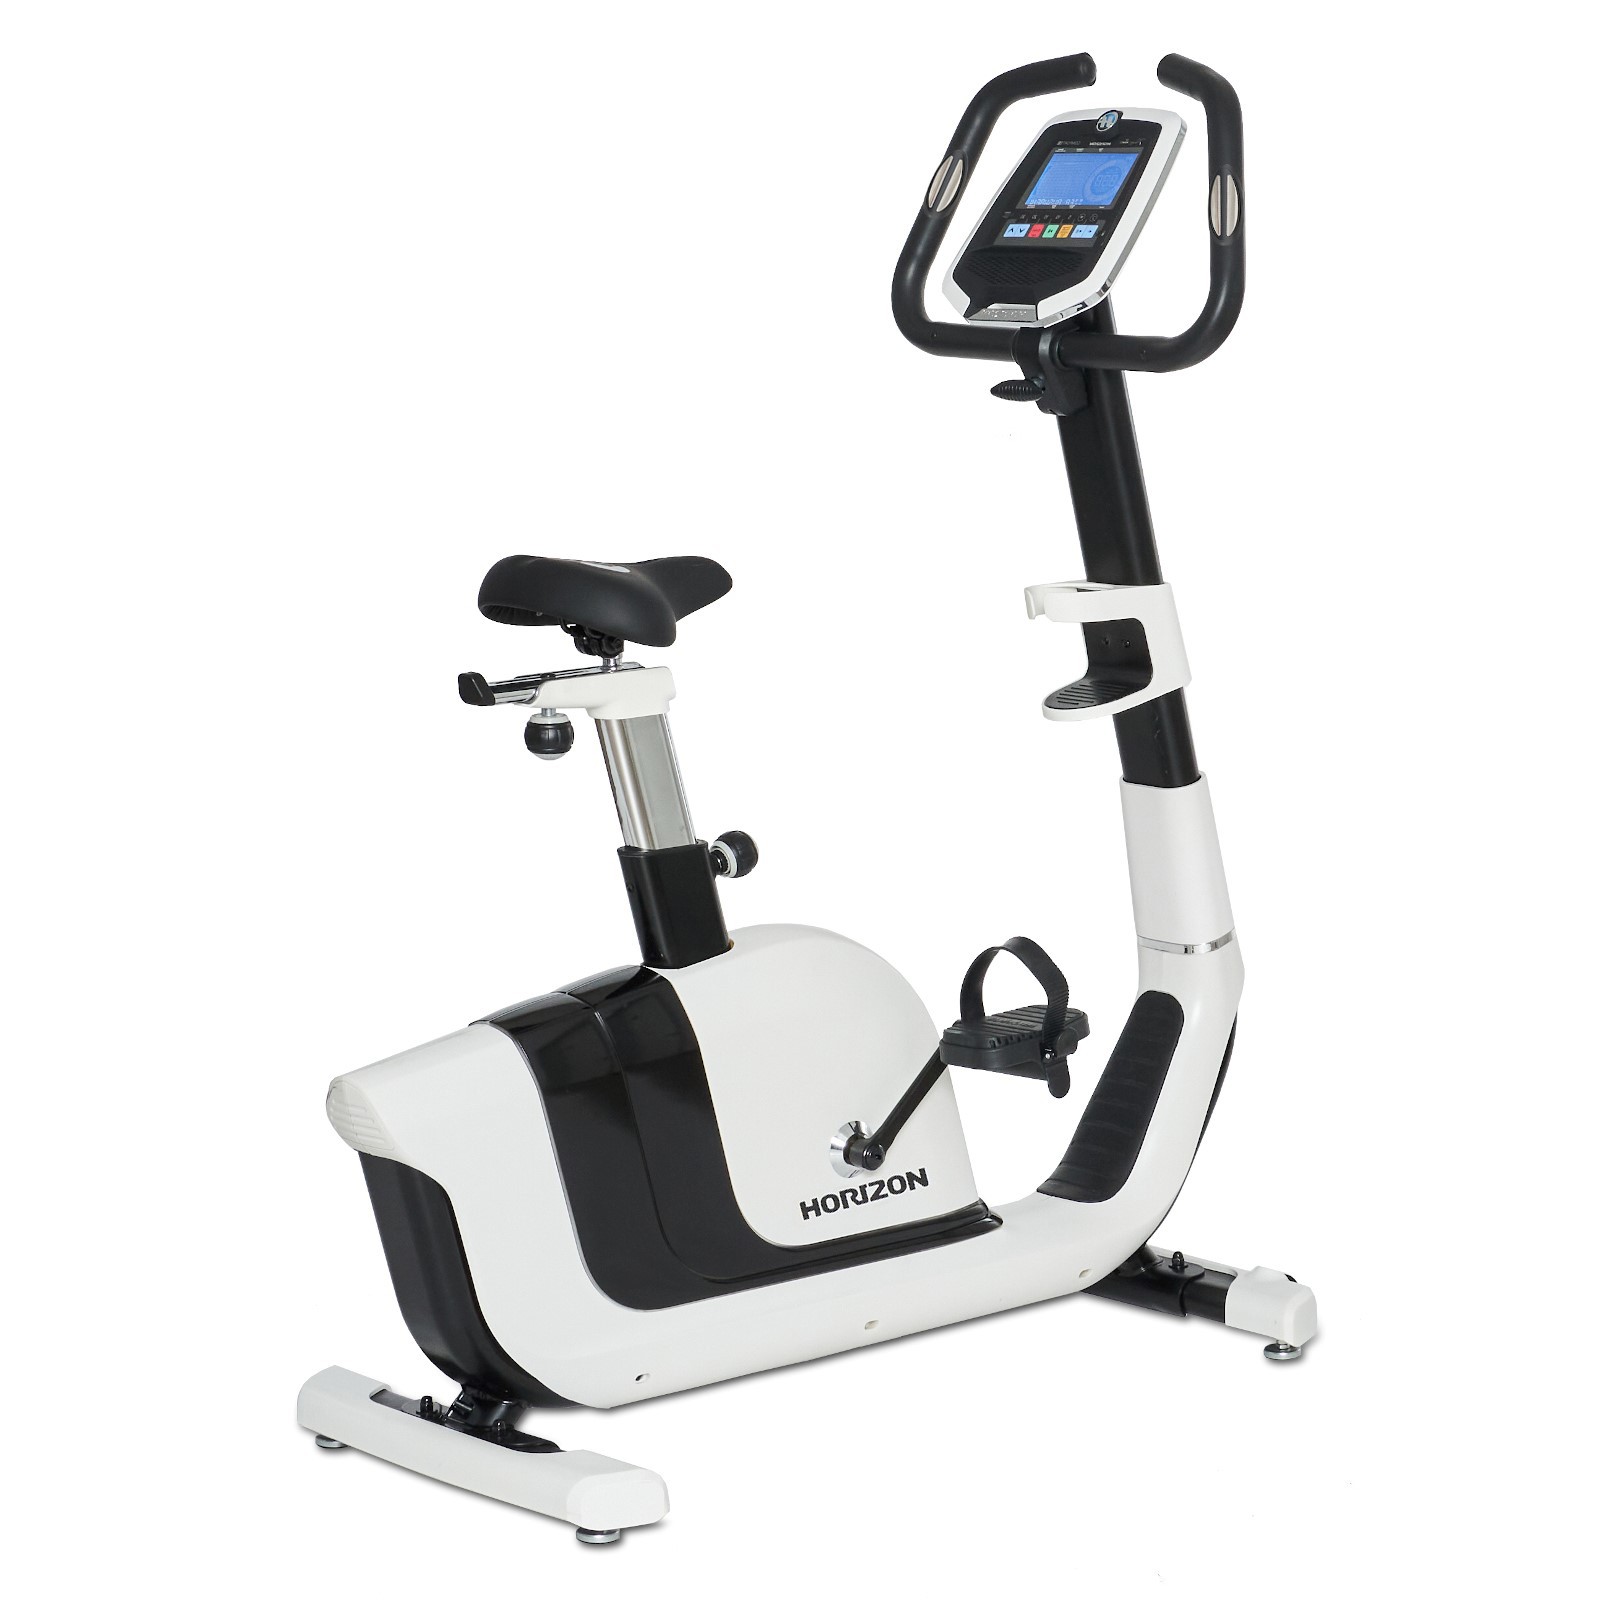 Review of the Horizon Exercise Bike